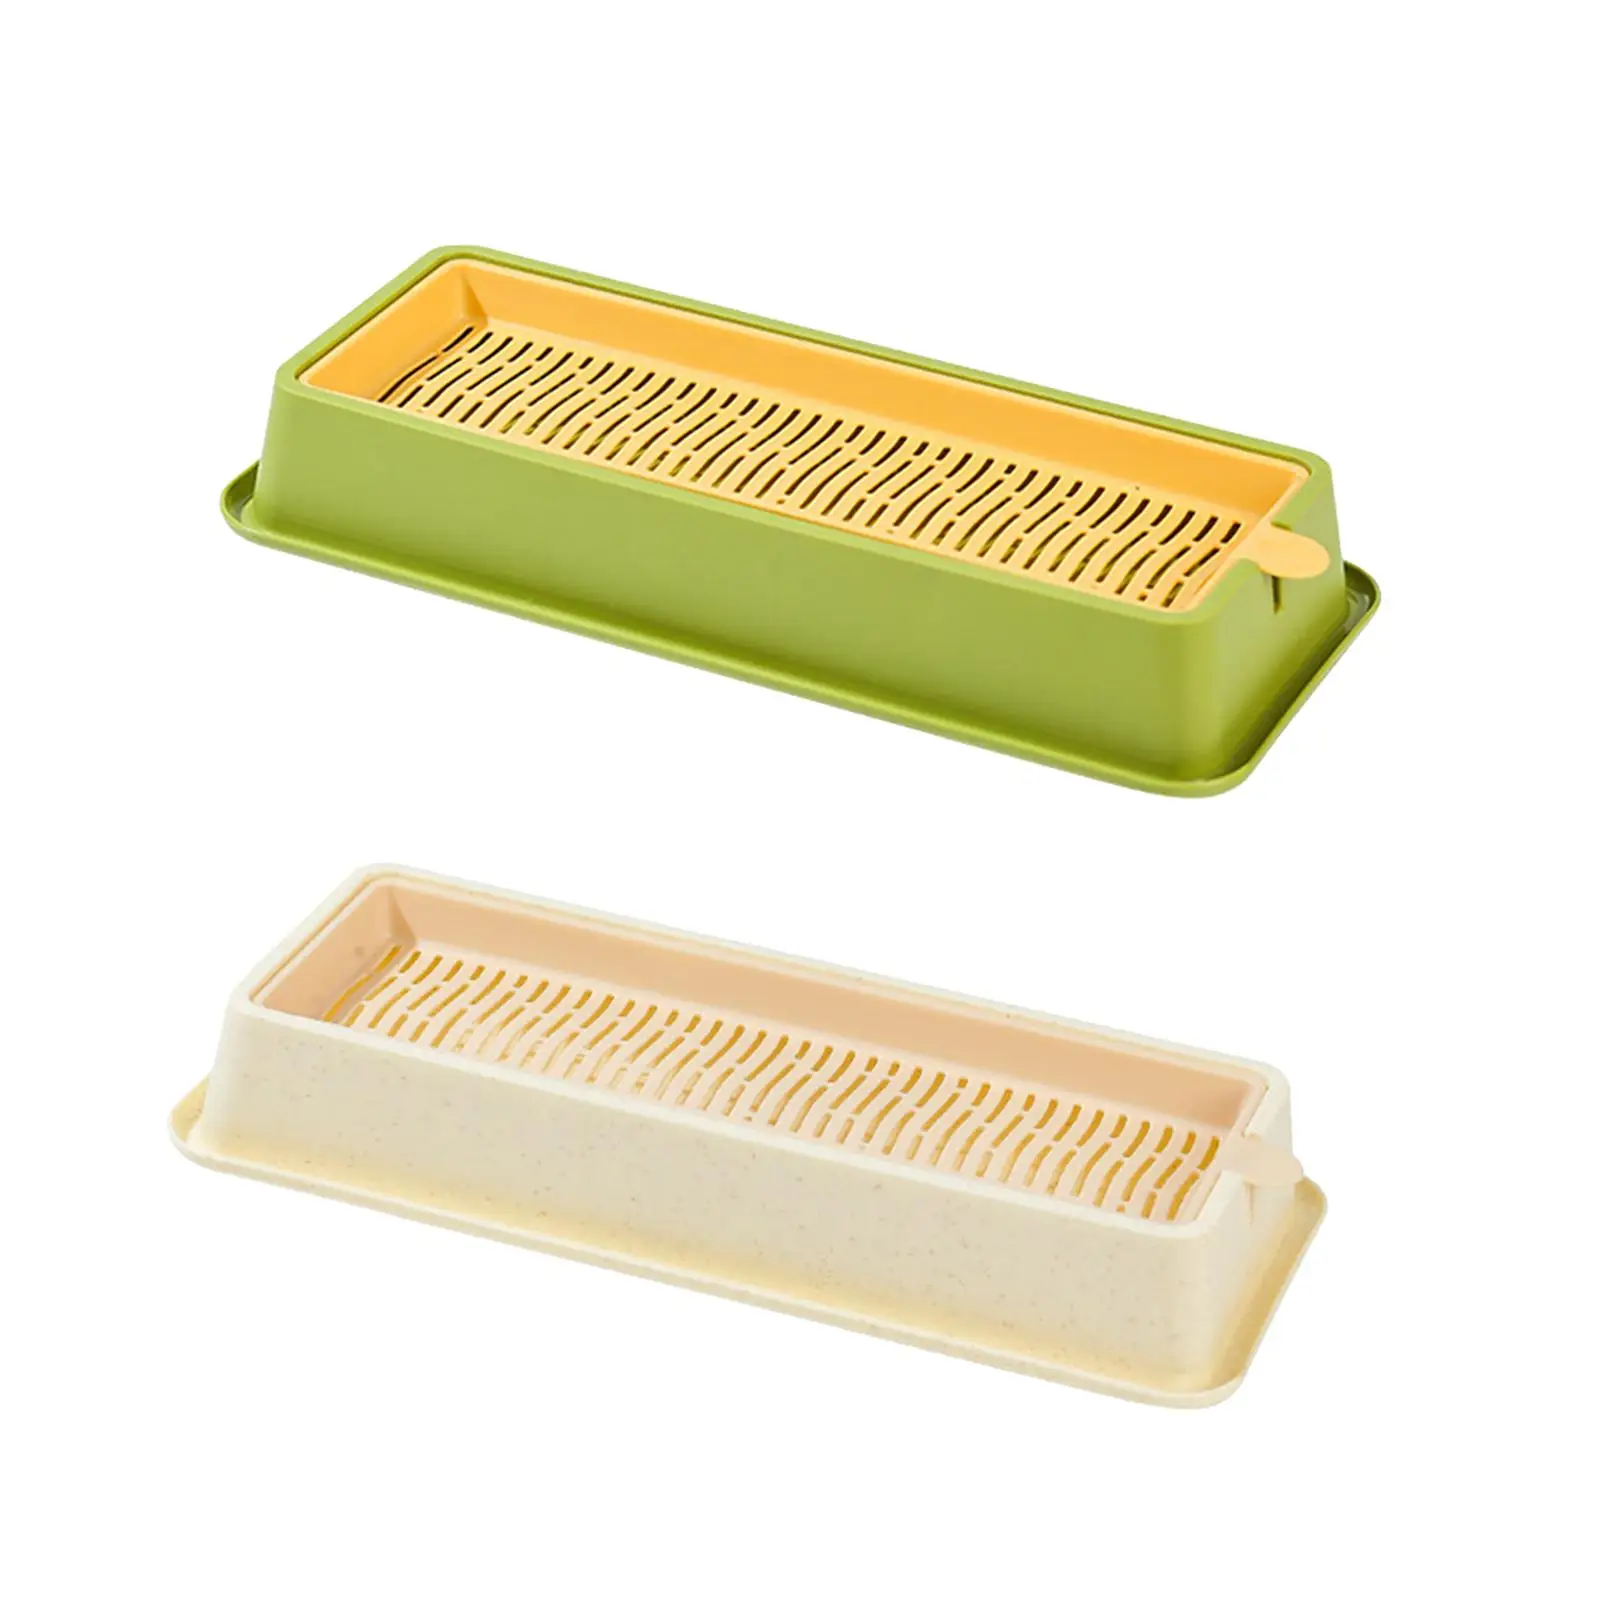 Seed Sprouter Tray Hydroponic Cat Grass Box Seed Germination Pet Cats Grass Growing Cat Grass Grow Tray for Seedling Planting